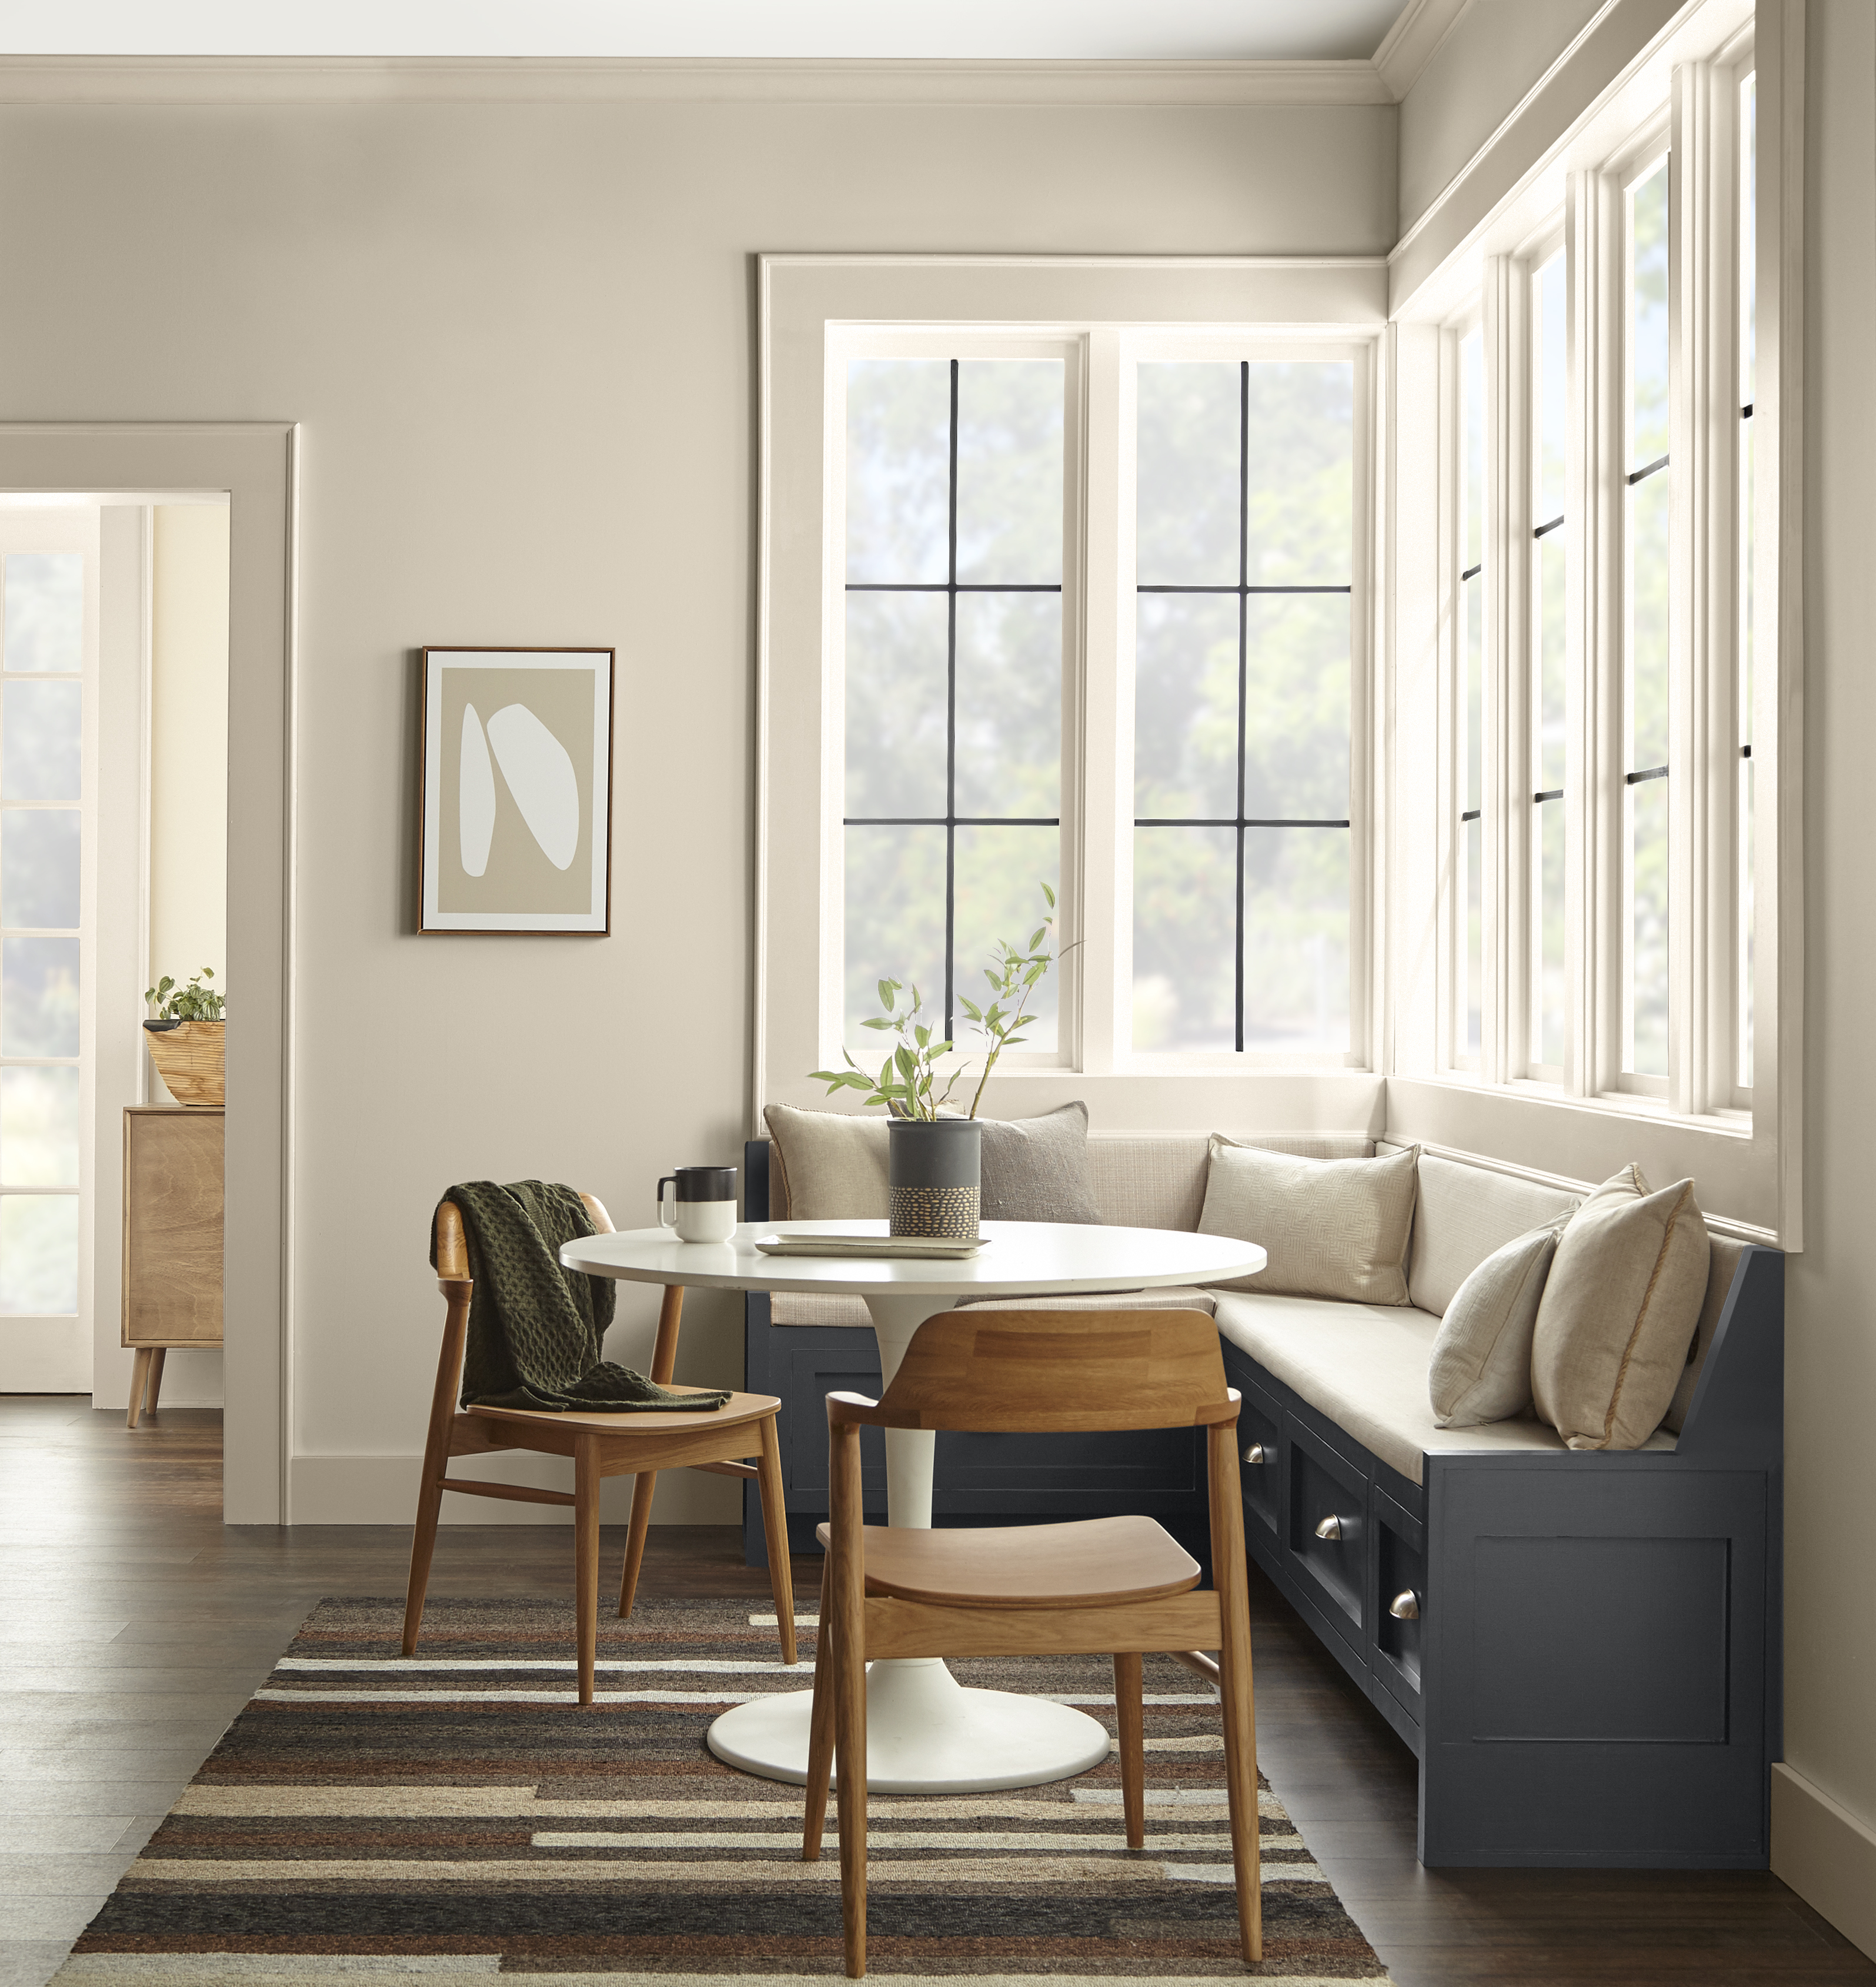 A corner kitchen nook with walls painted in Even Better Beige, and a seating area in a contrasting dark grey colour.